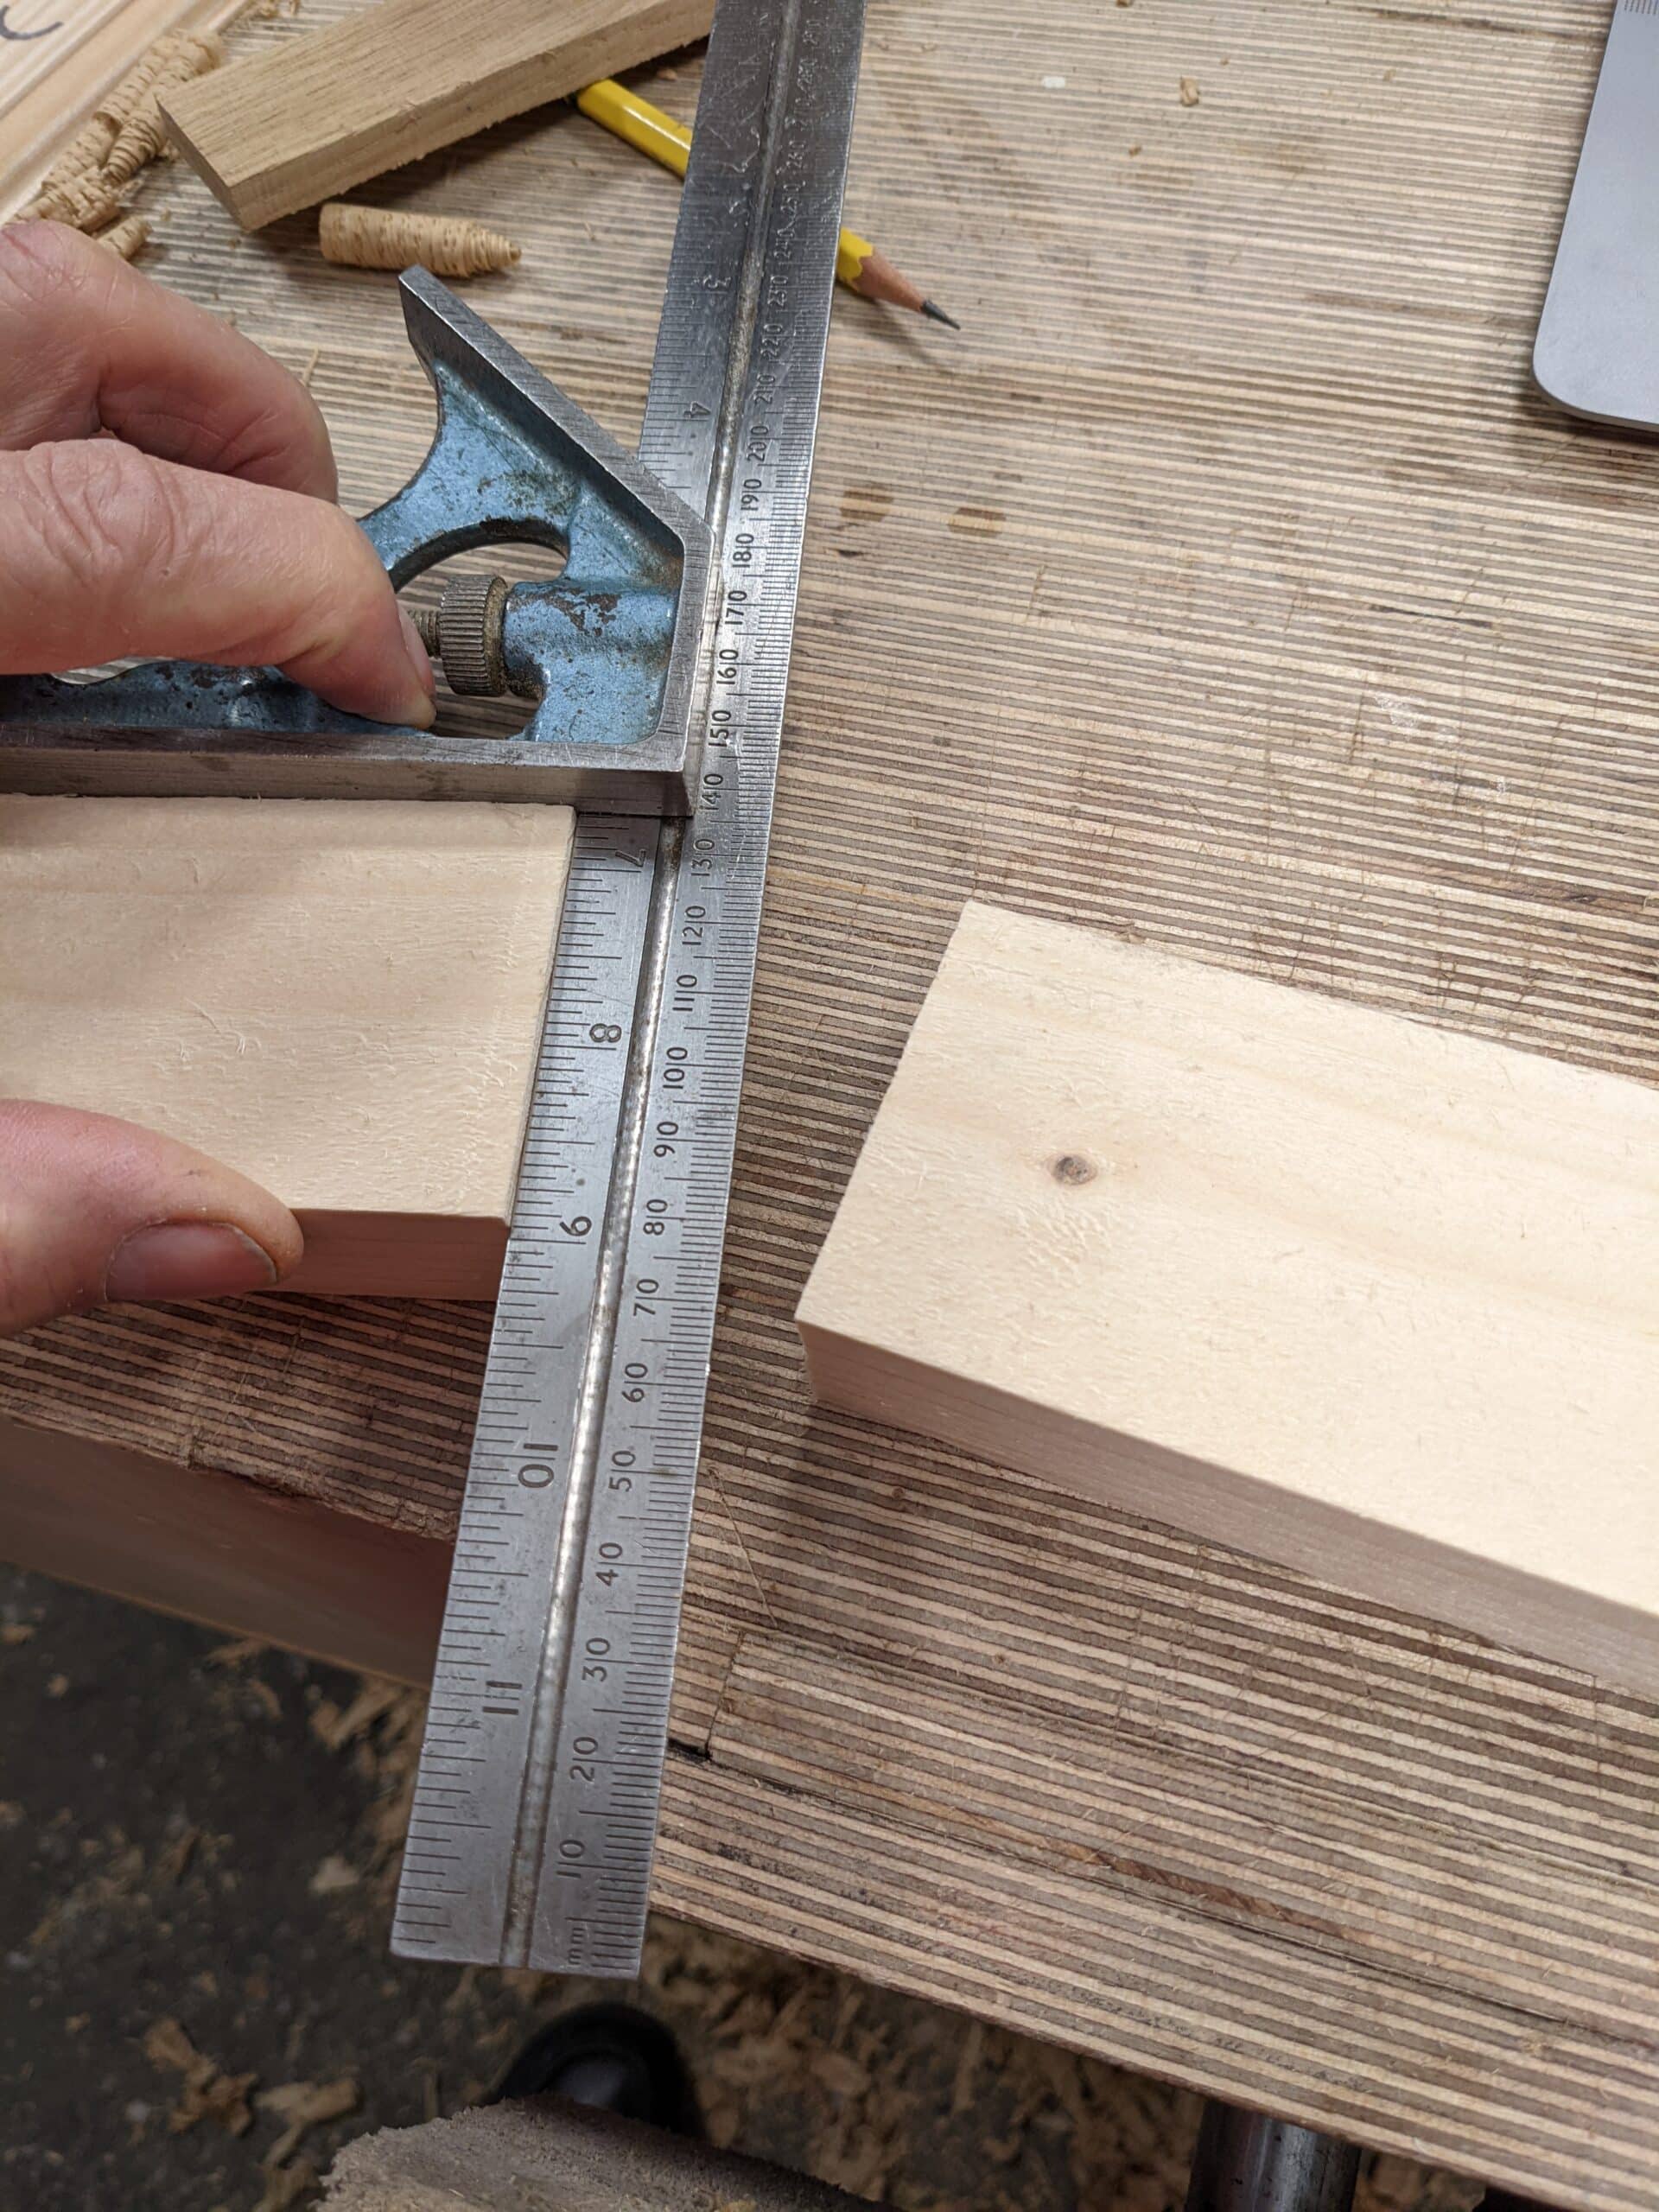 On Woodworking Squares and Working Wood - Paul Sellers' Blog